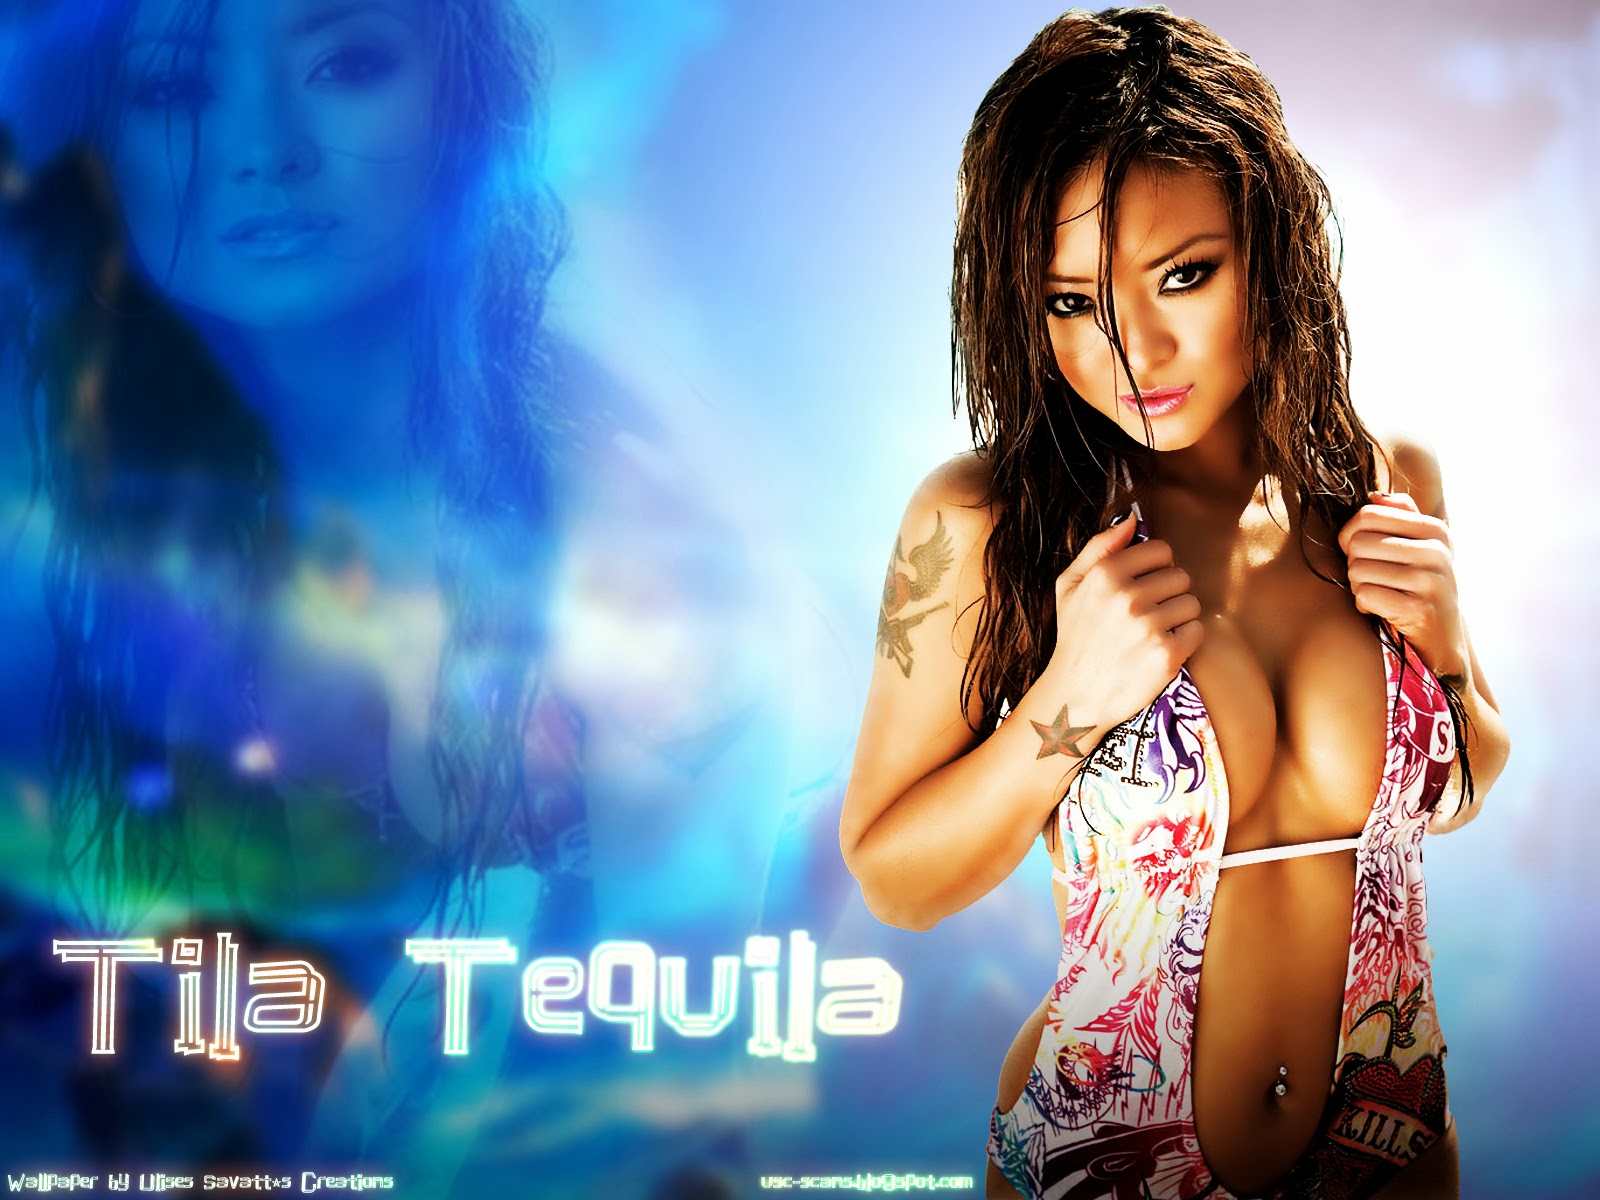 Tila tequila rides sybian fan compilations